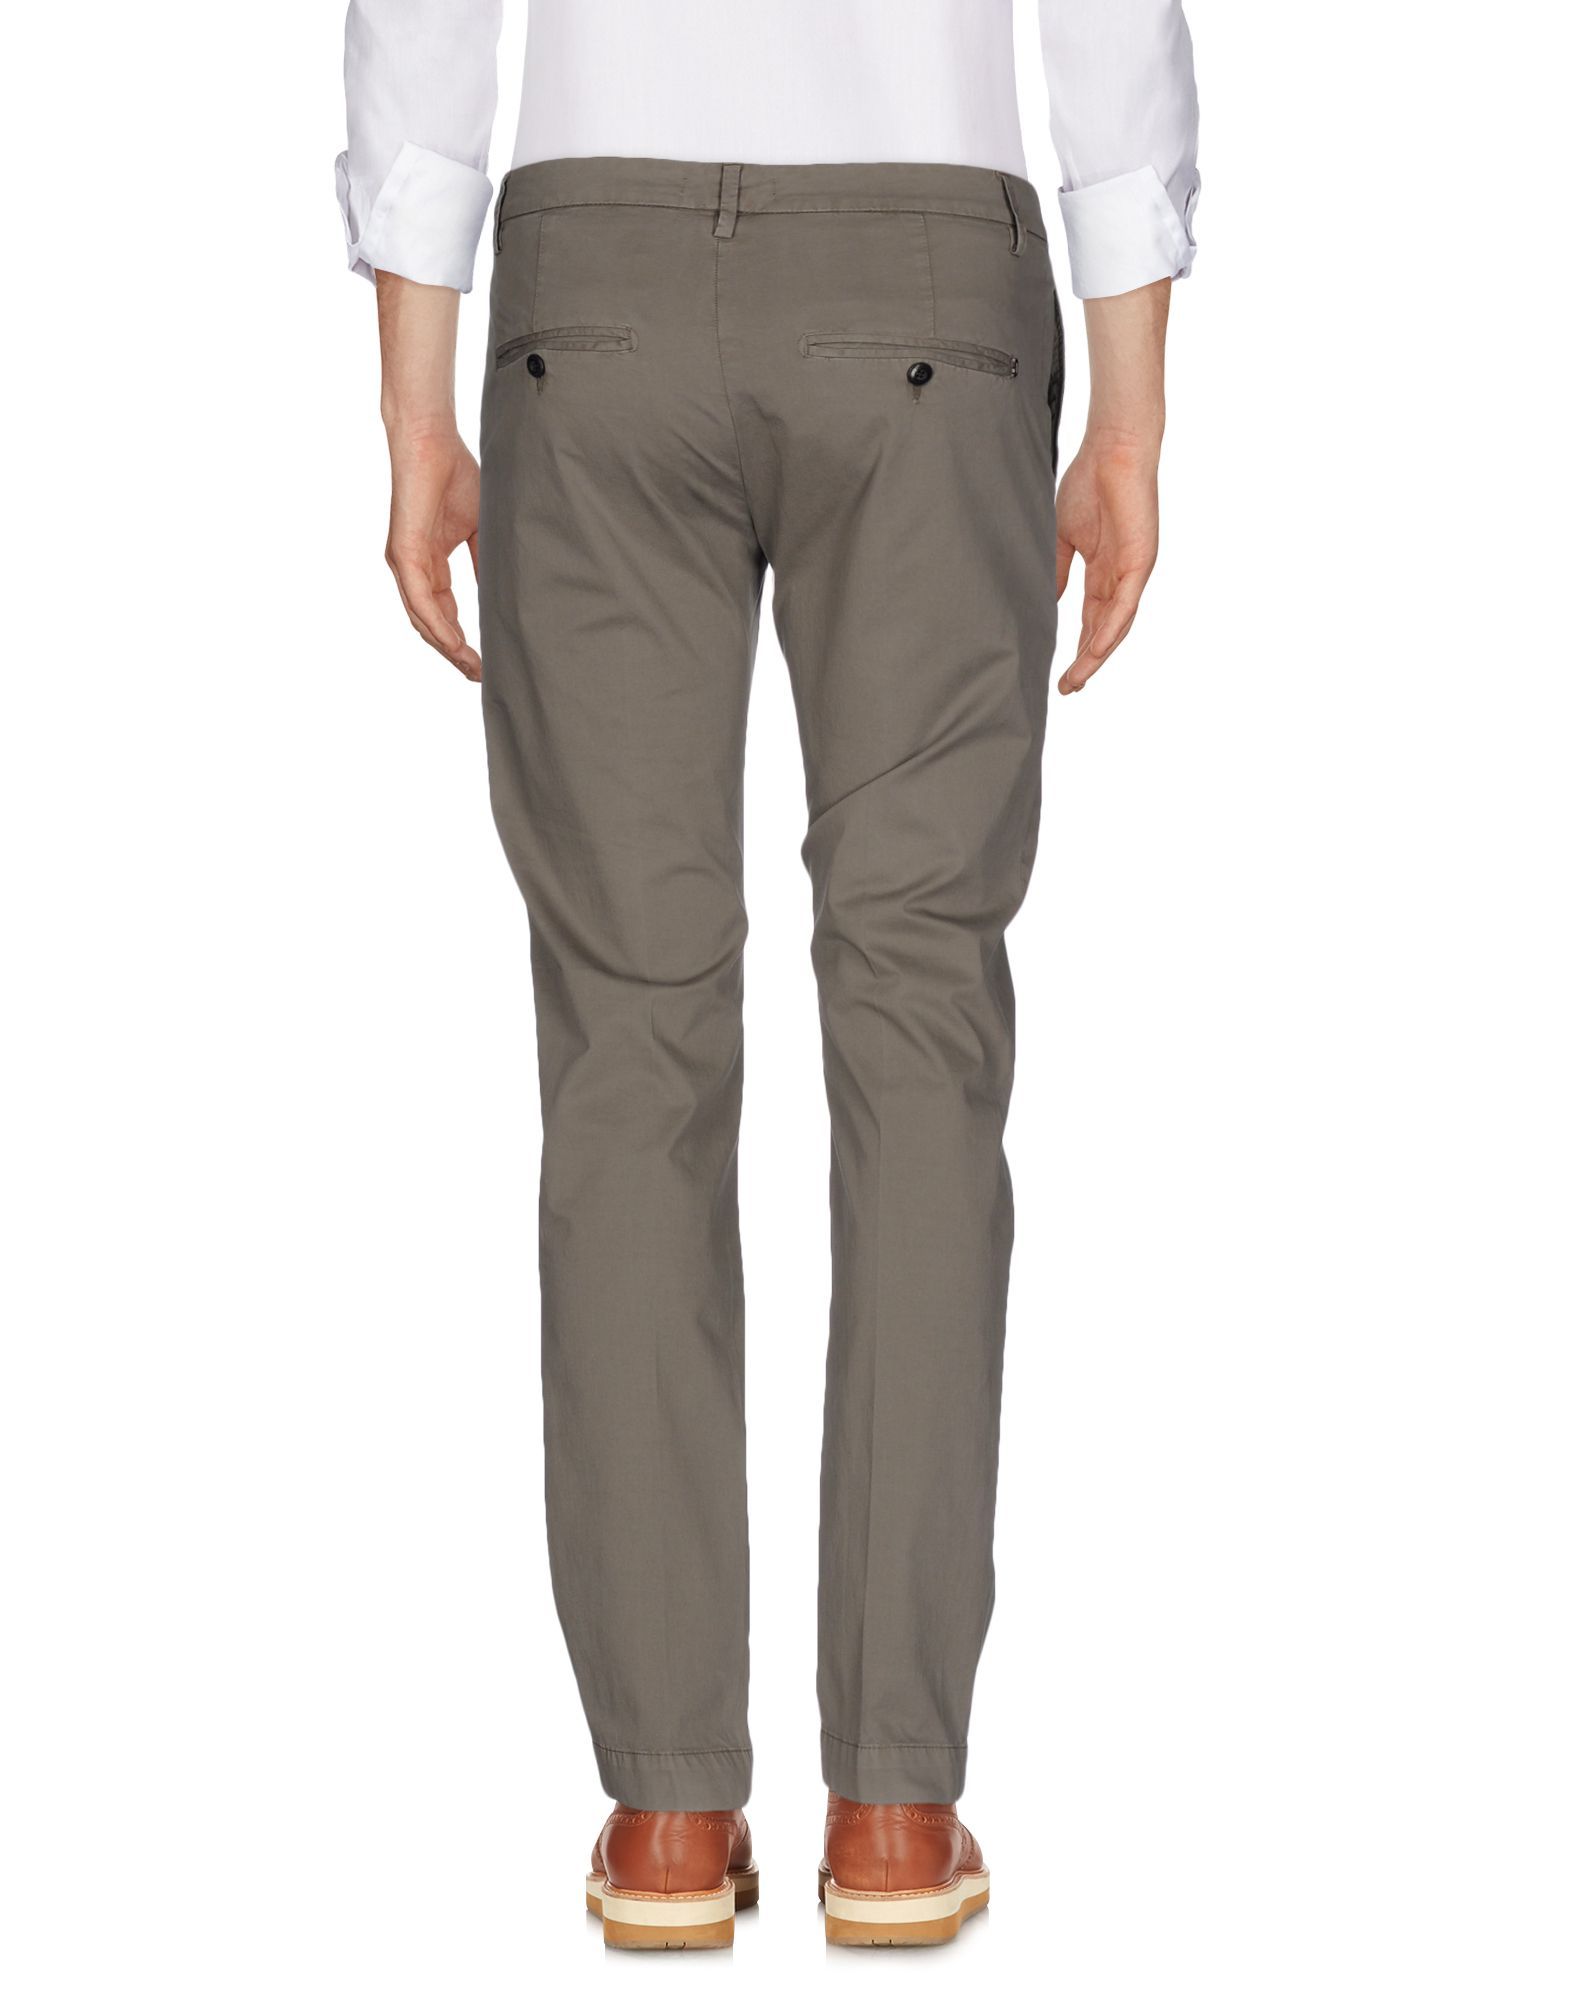 Plain weave<br>Basic solid colour<br>Low waisted<br>Regular fit<br>Straight leg<br>Logo<br>Snap-buttons, zip<br>Multipockets<br>Contains non-textile parts of animal origin<br>Stretch<br>Chinos<br>